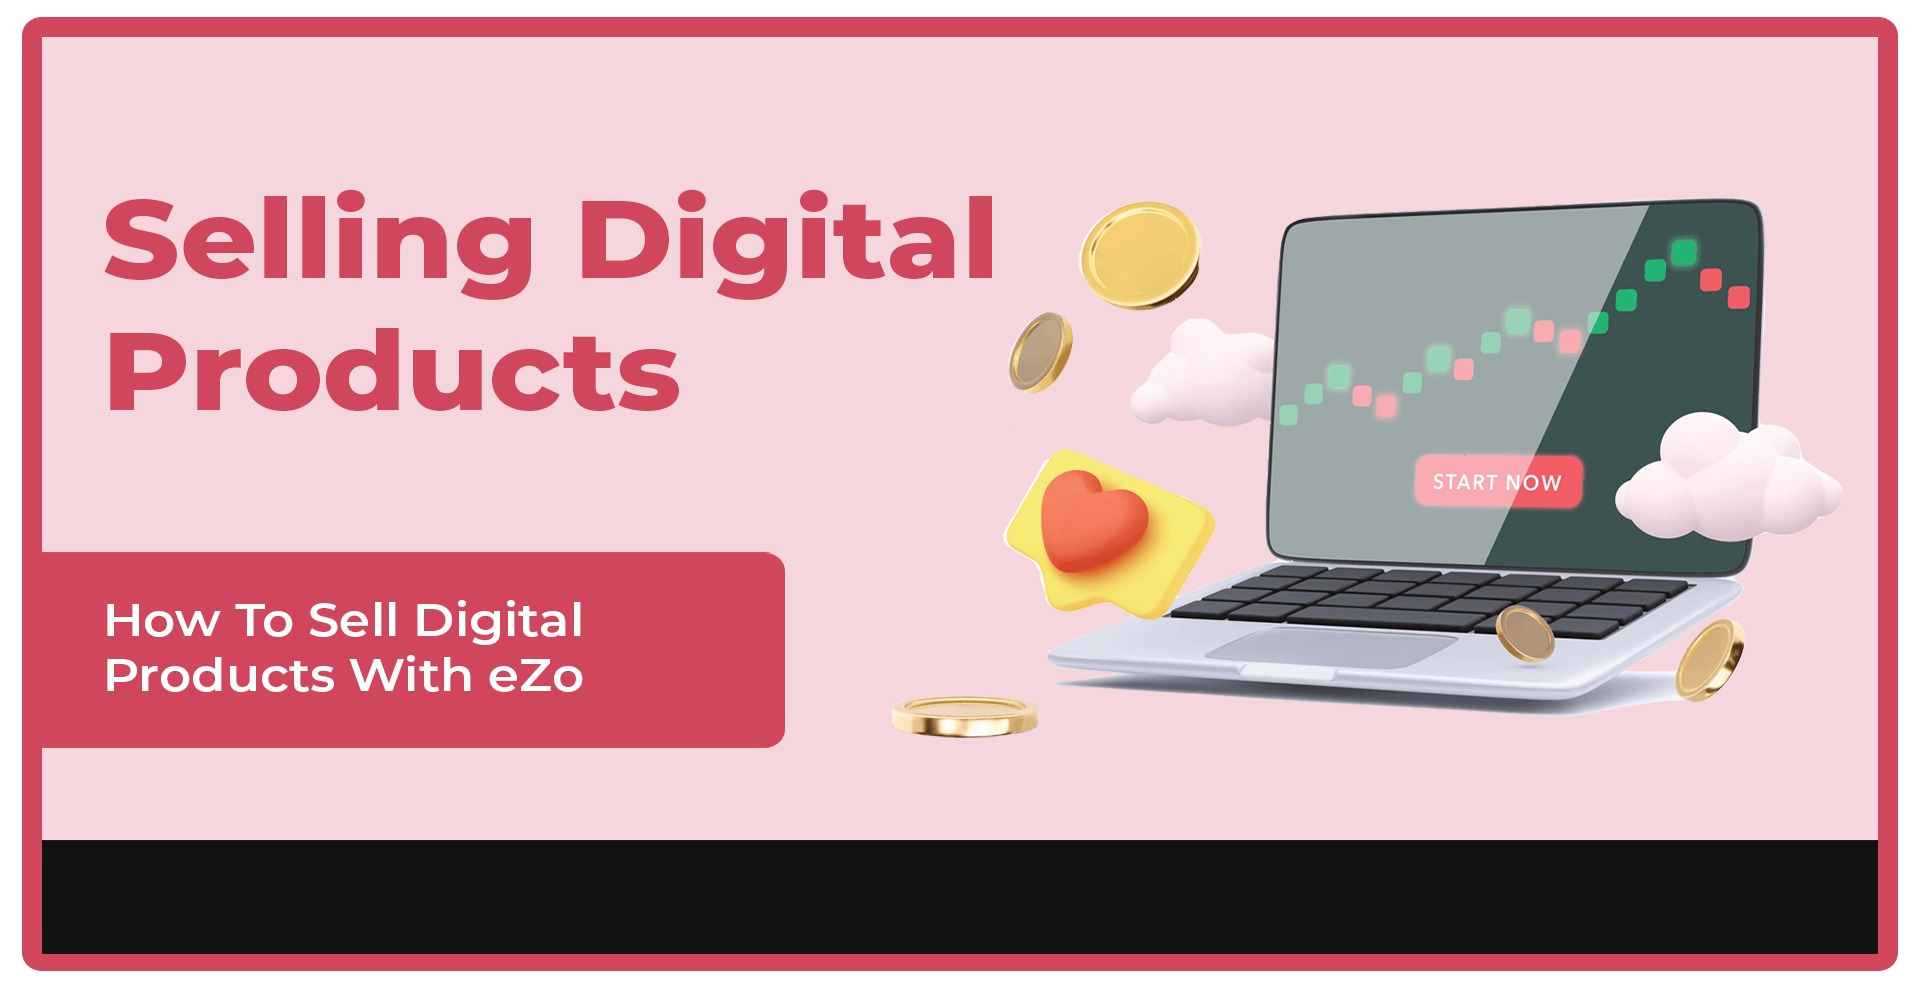 Selling Digital Products With eZo